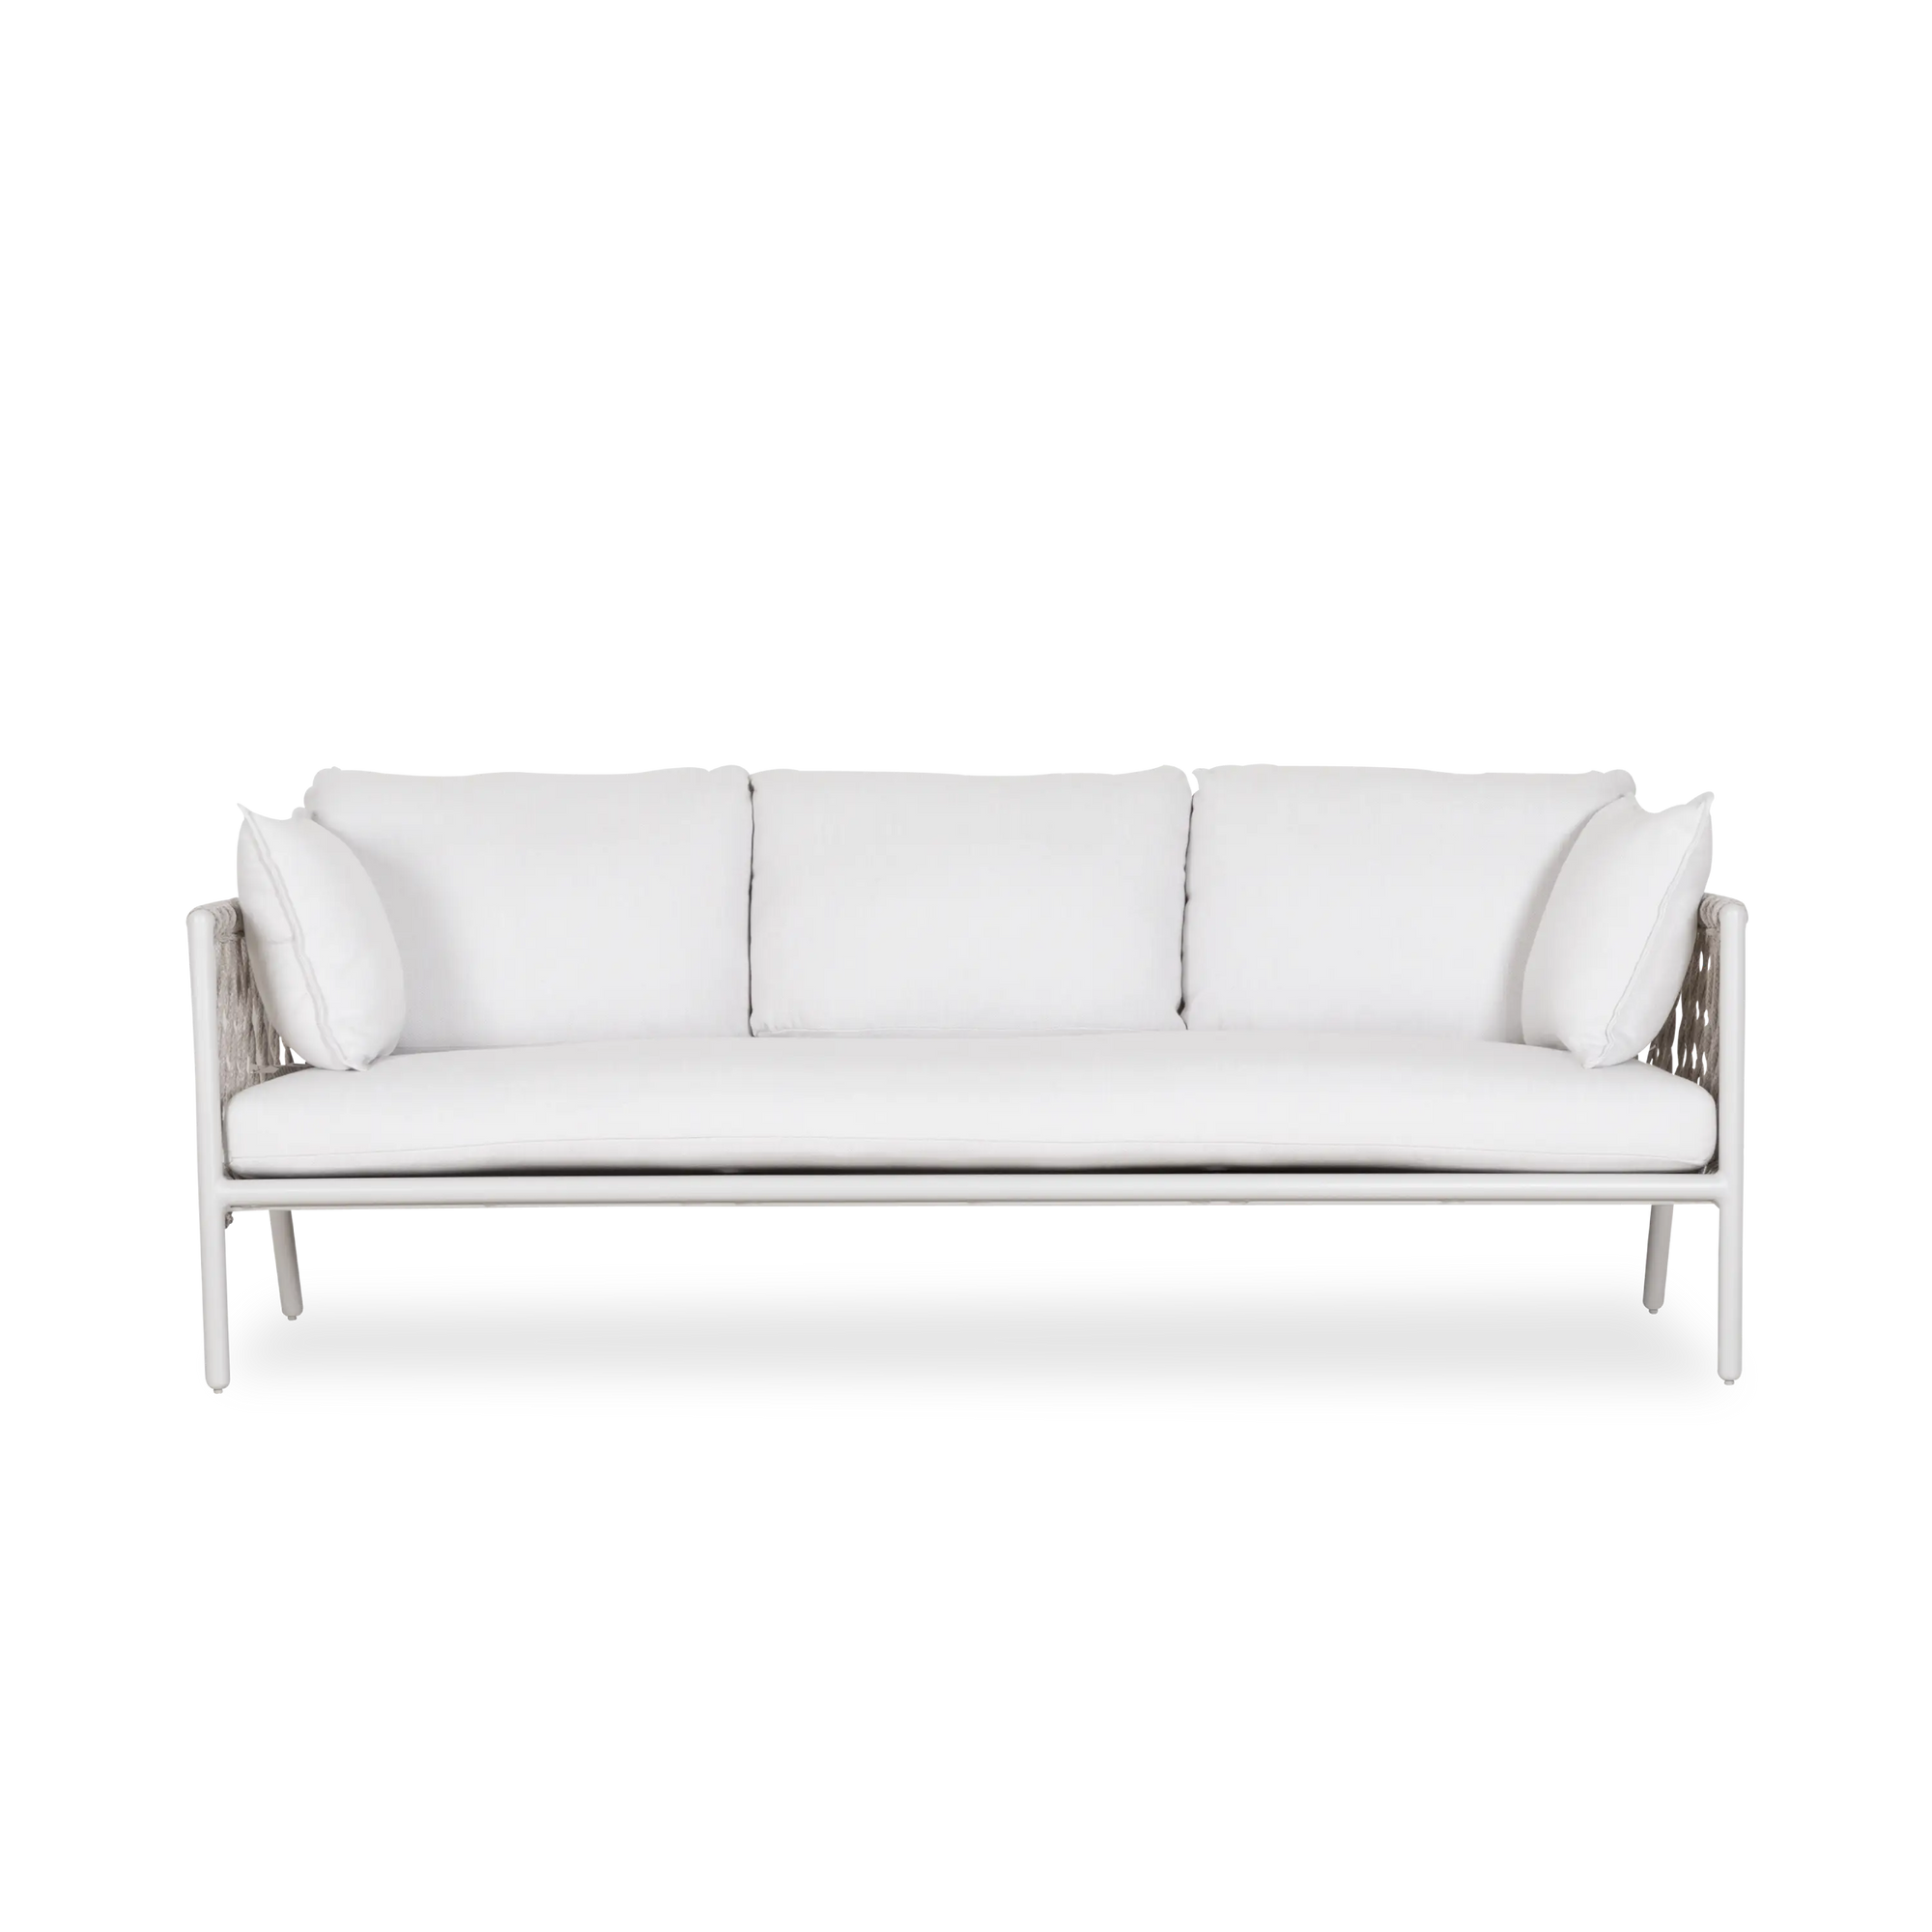 Designed in collaboration with Ann Marie Vering, the Oscar Sofa is perfect for indoors or out.